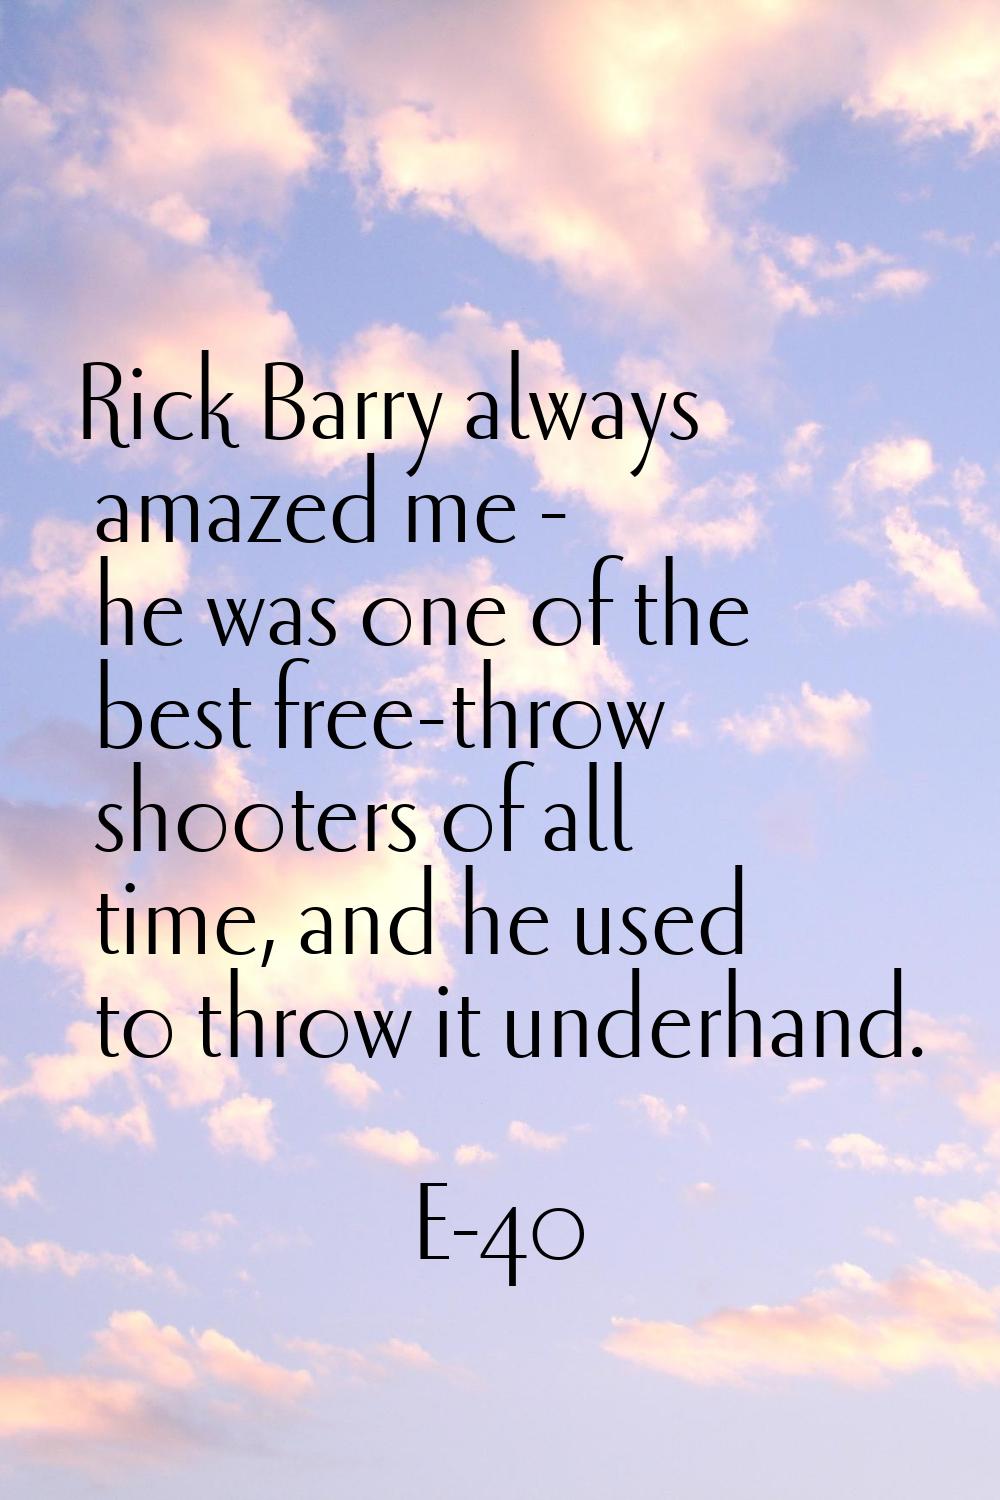 Rick Barry always amazed me - he was one of the best free-throw shooters of all time, and he used t